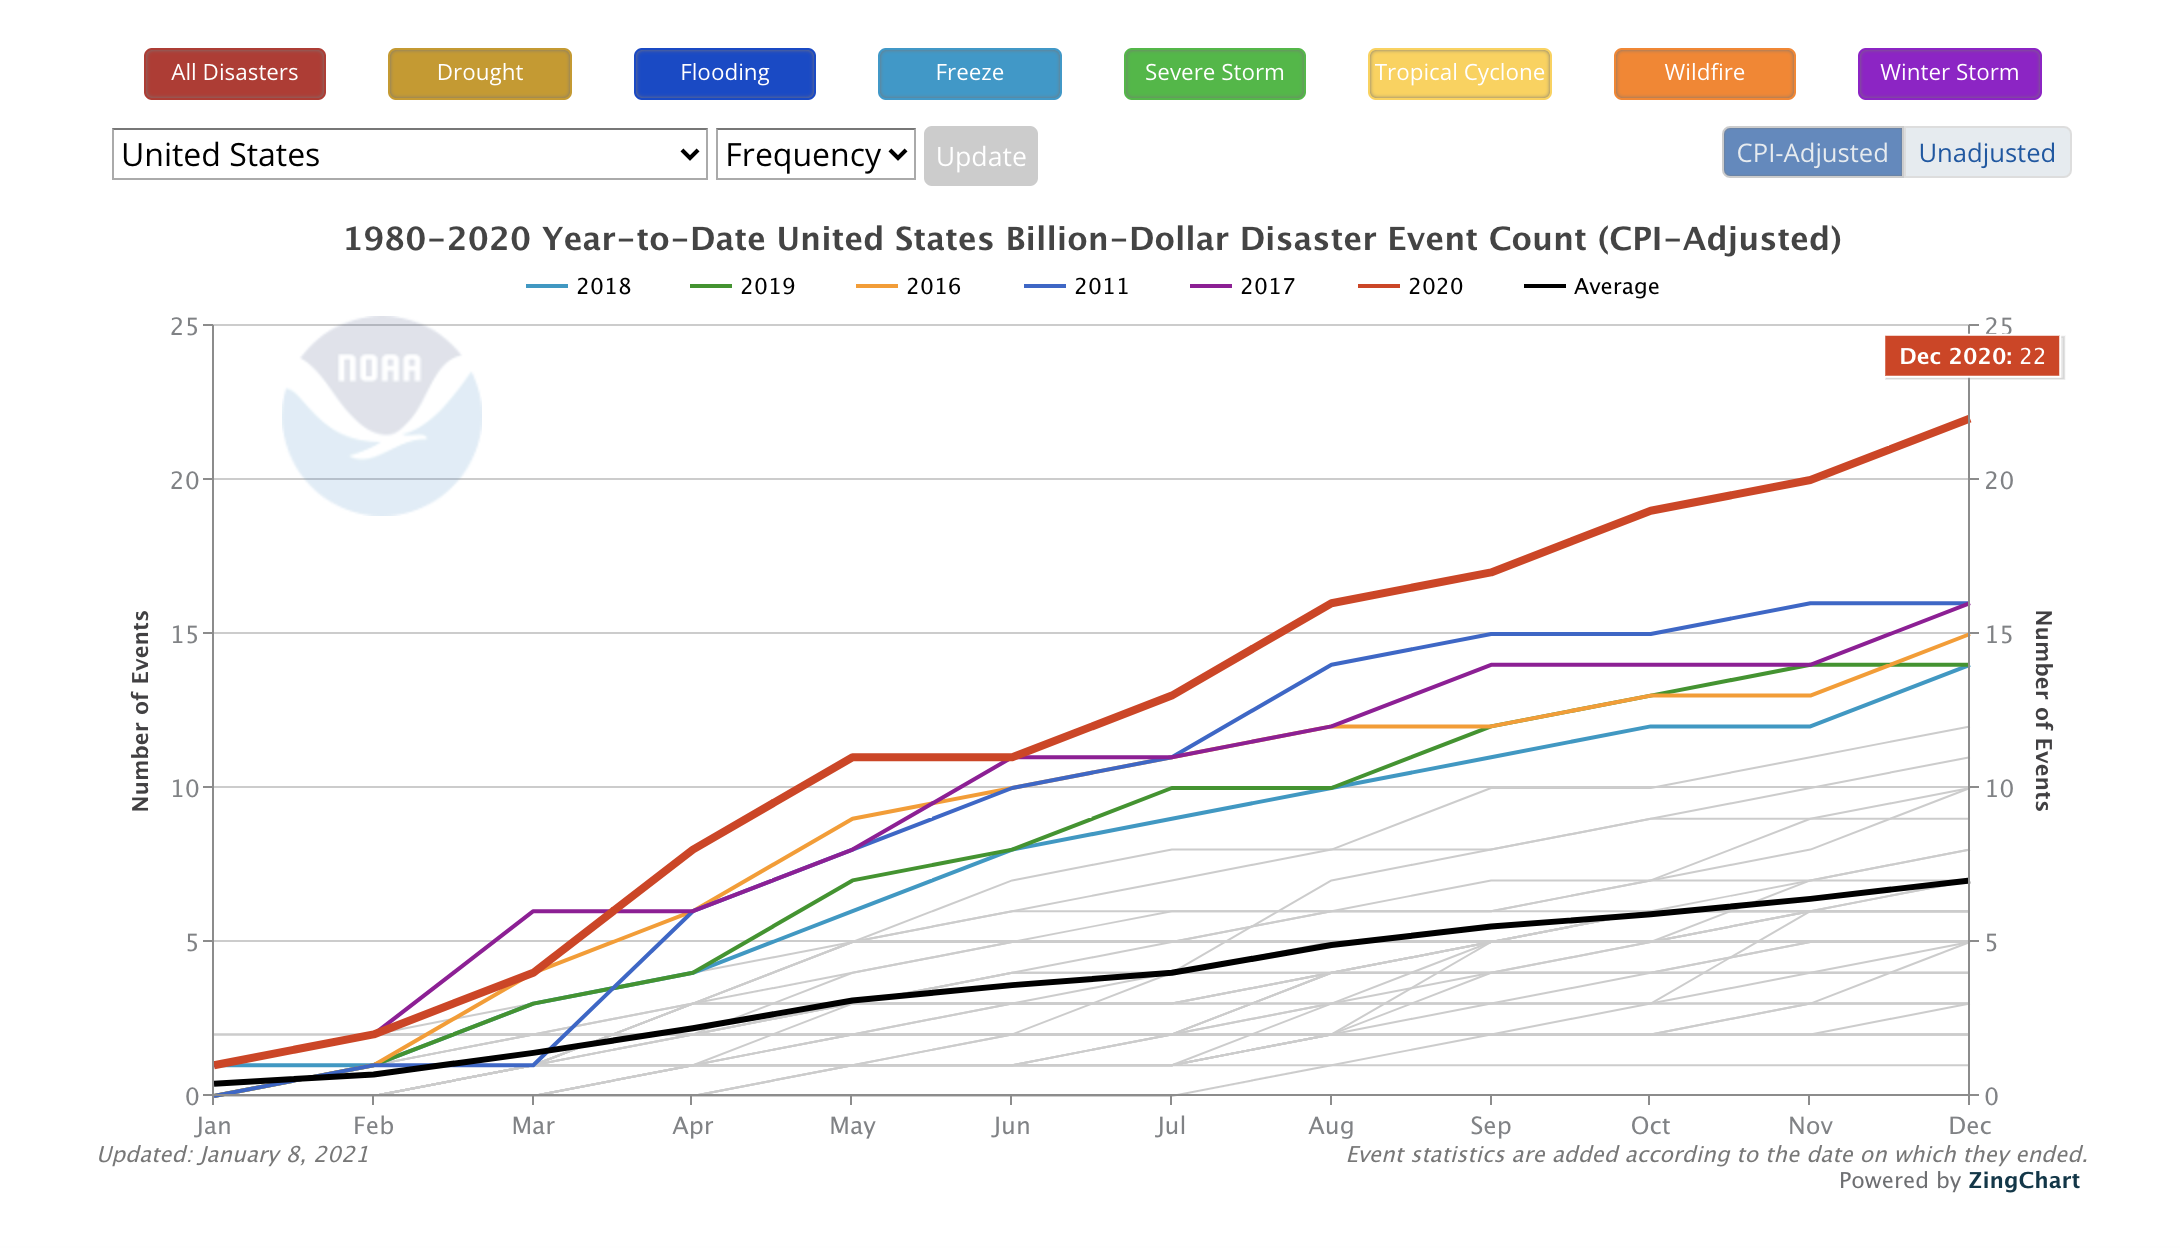 2020: A Record Year for Billion-Dollar Disasters